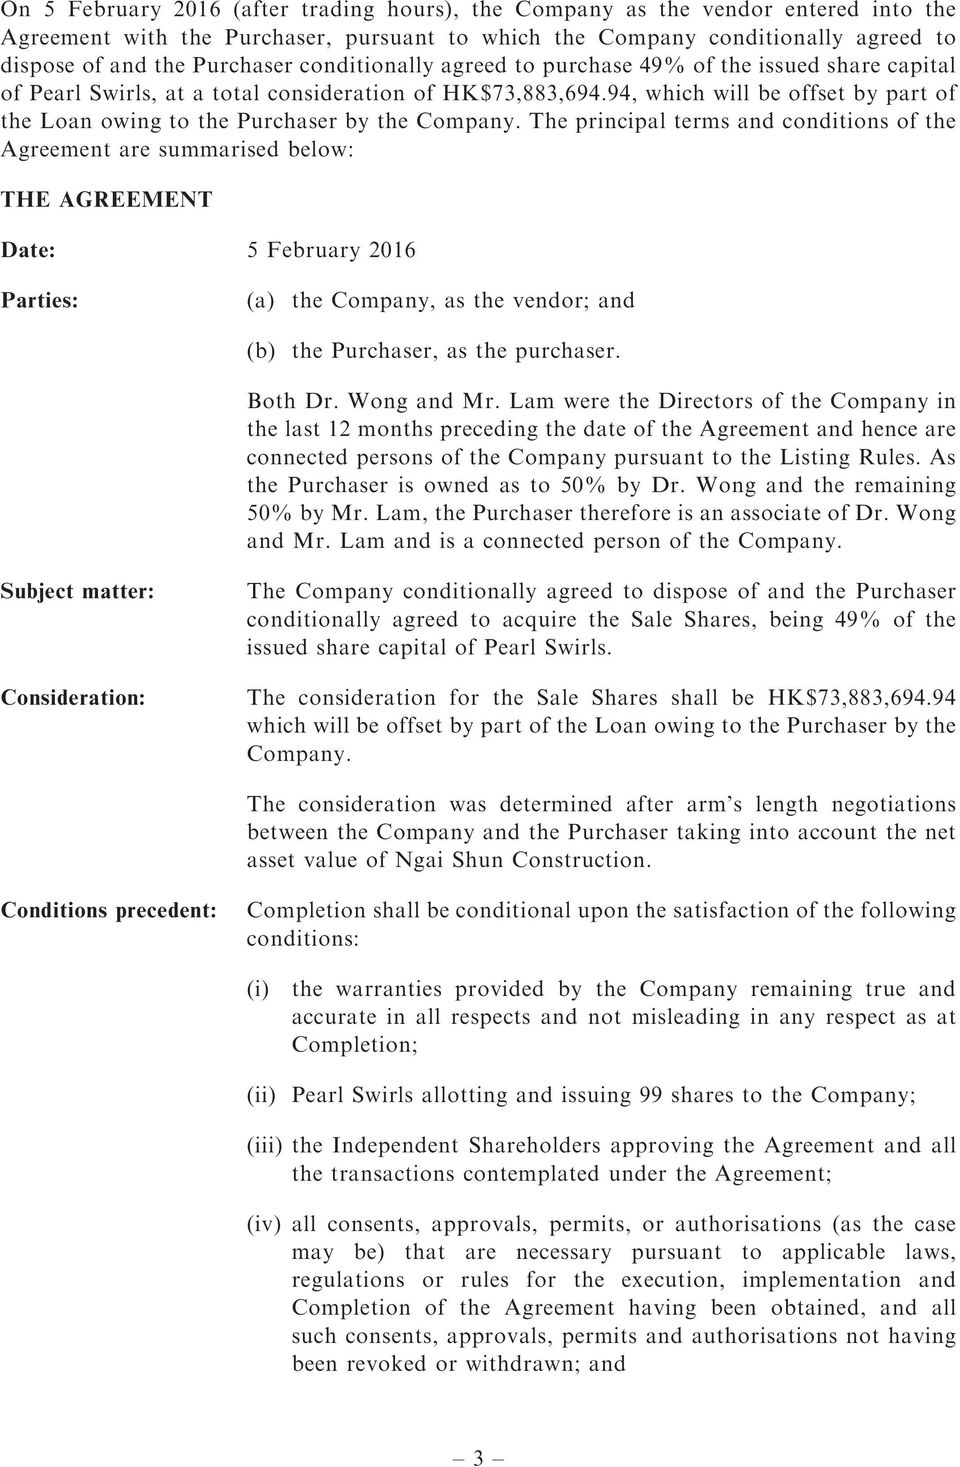 94, which will be offset by part of the Loan owing to the Purchaser by the Company.